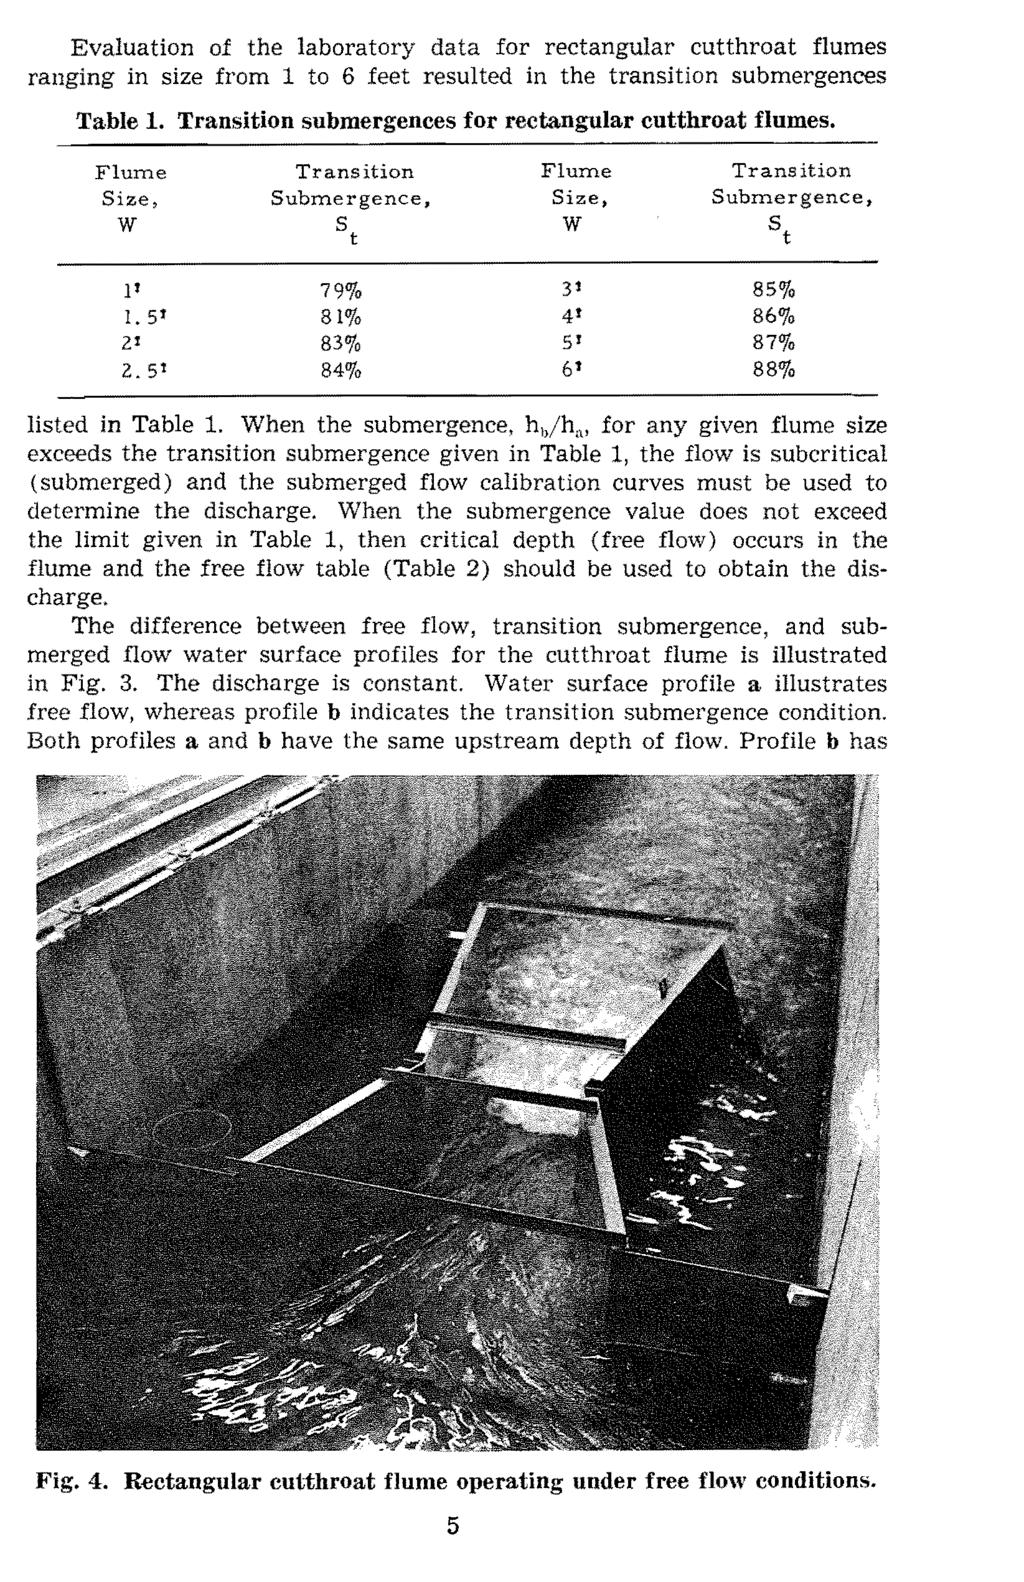 Evlution of the lbortory dt for rectngulr cutthrot flumes rnging in size from 1 to 6 feet resulted in the trnsition submergences Tble 1. Trnsition submergences for rectngulr cutthrot flumes. Flum.